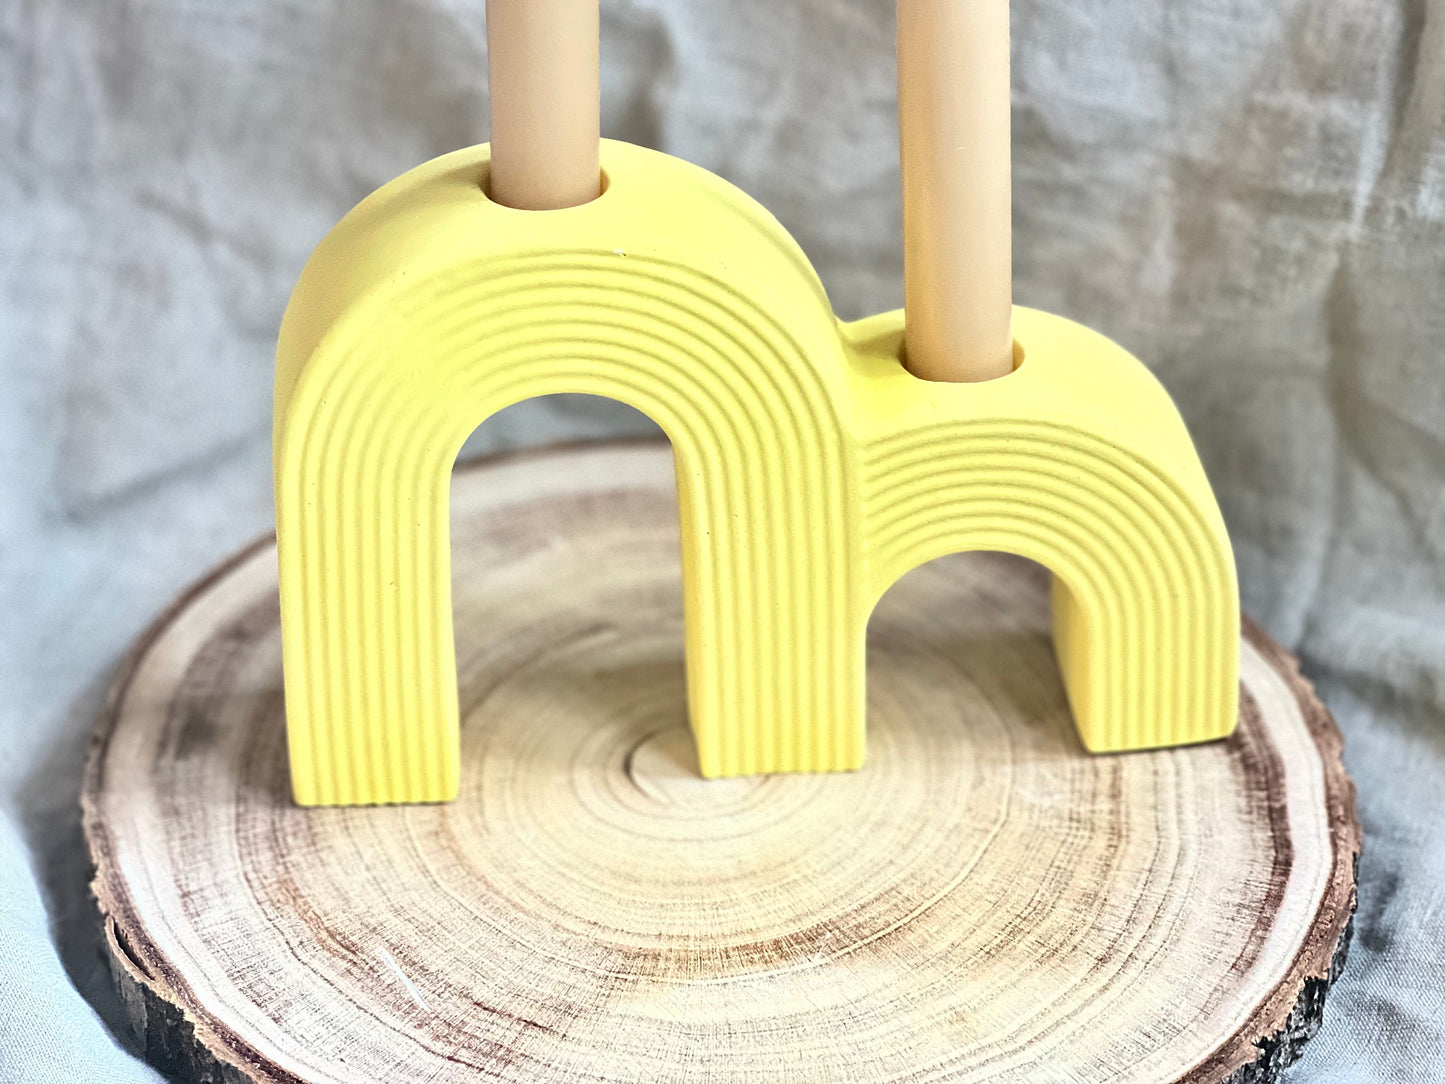 Arch candle holder- The Danish Pastels